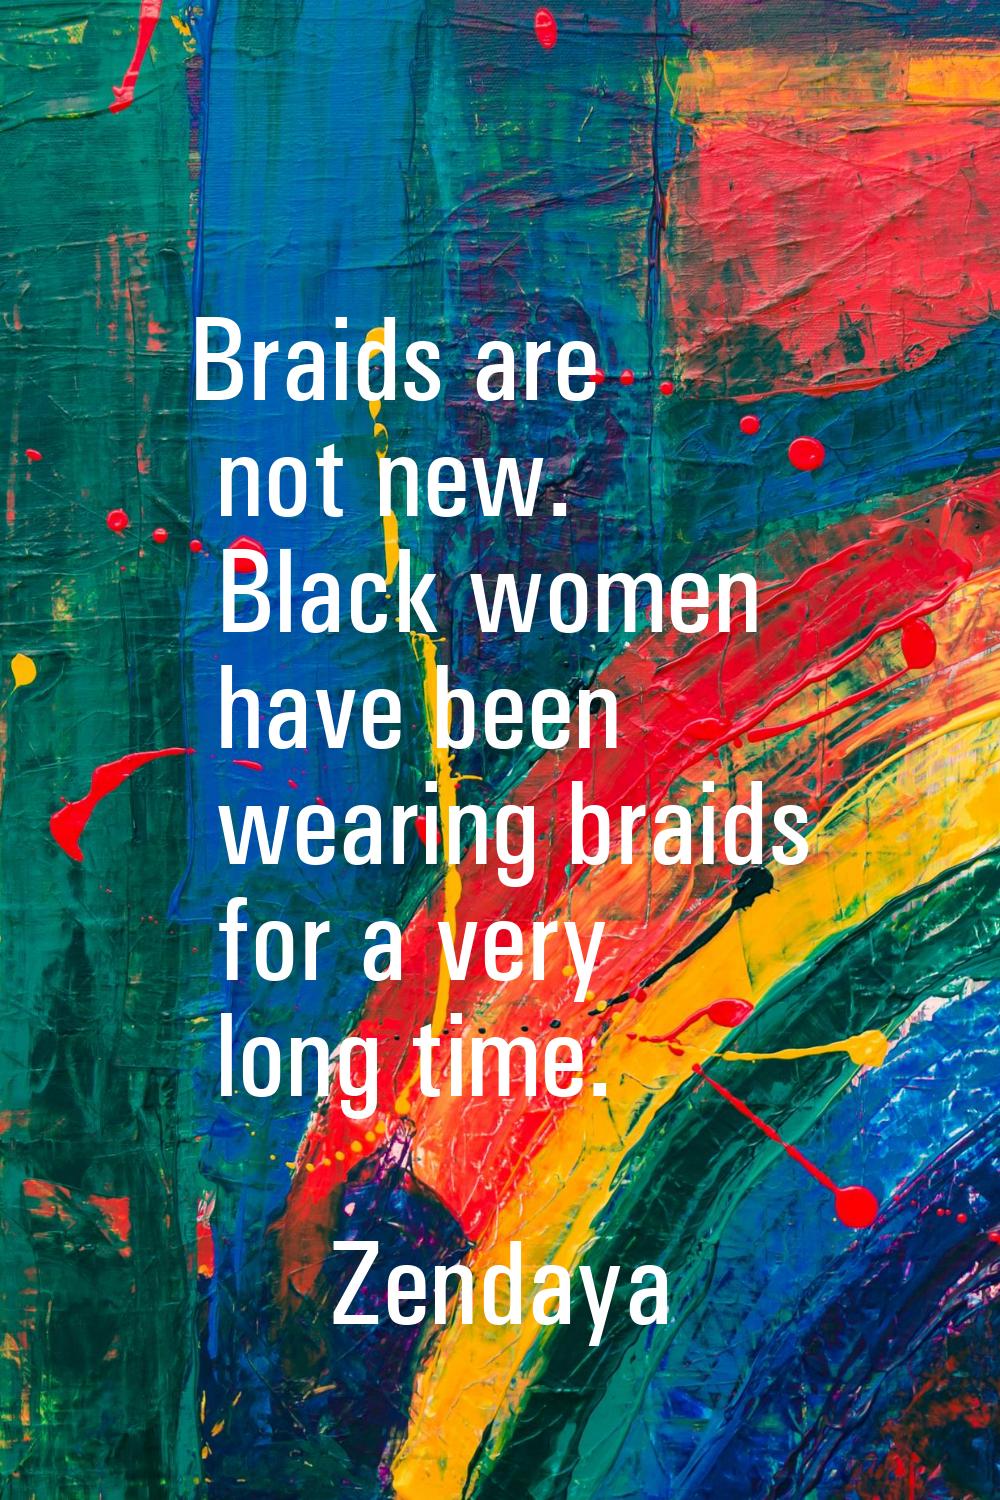 Braids are not new. Black women have been wearing braids for a very long time.